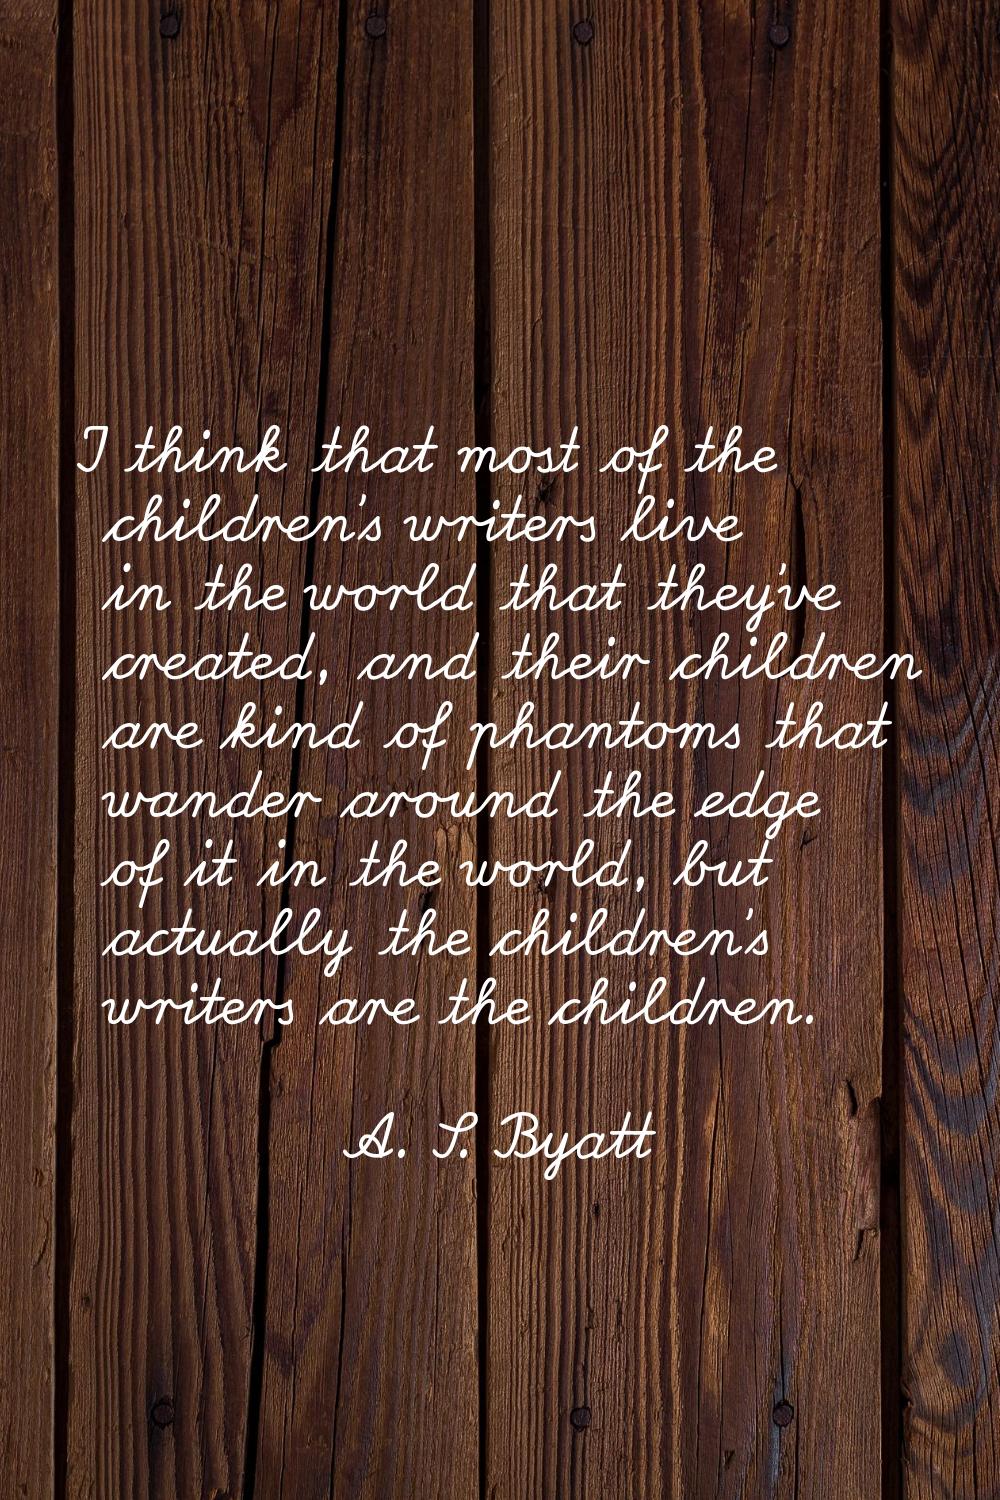 I think that most of the children's writers live in the world that they've created, and their child